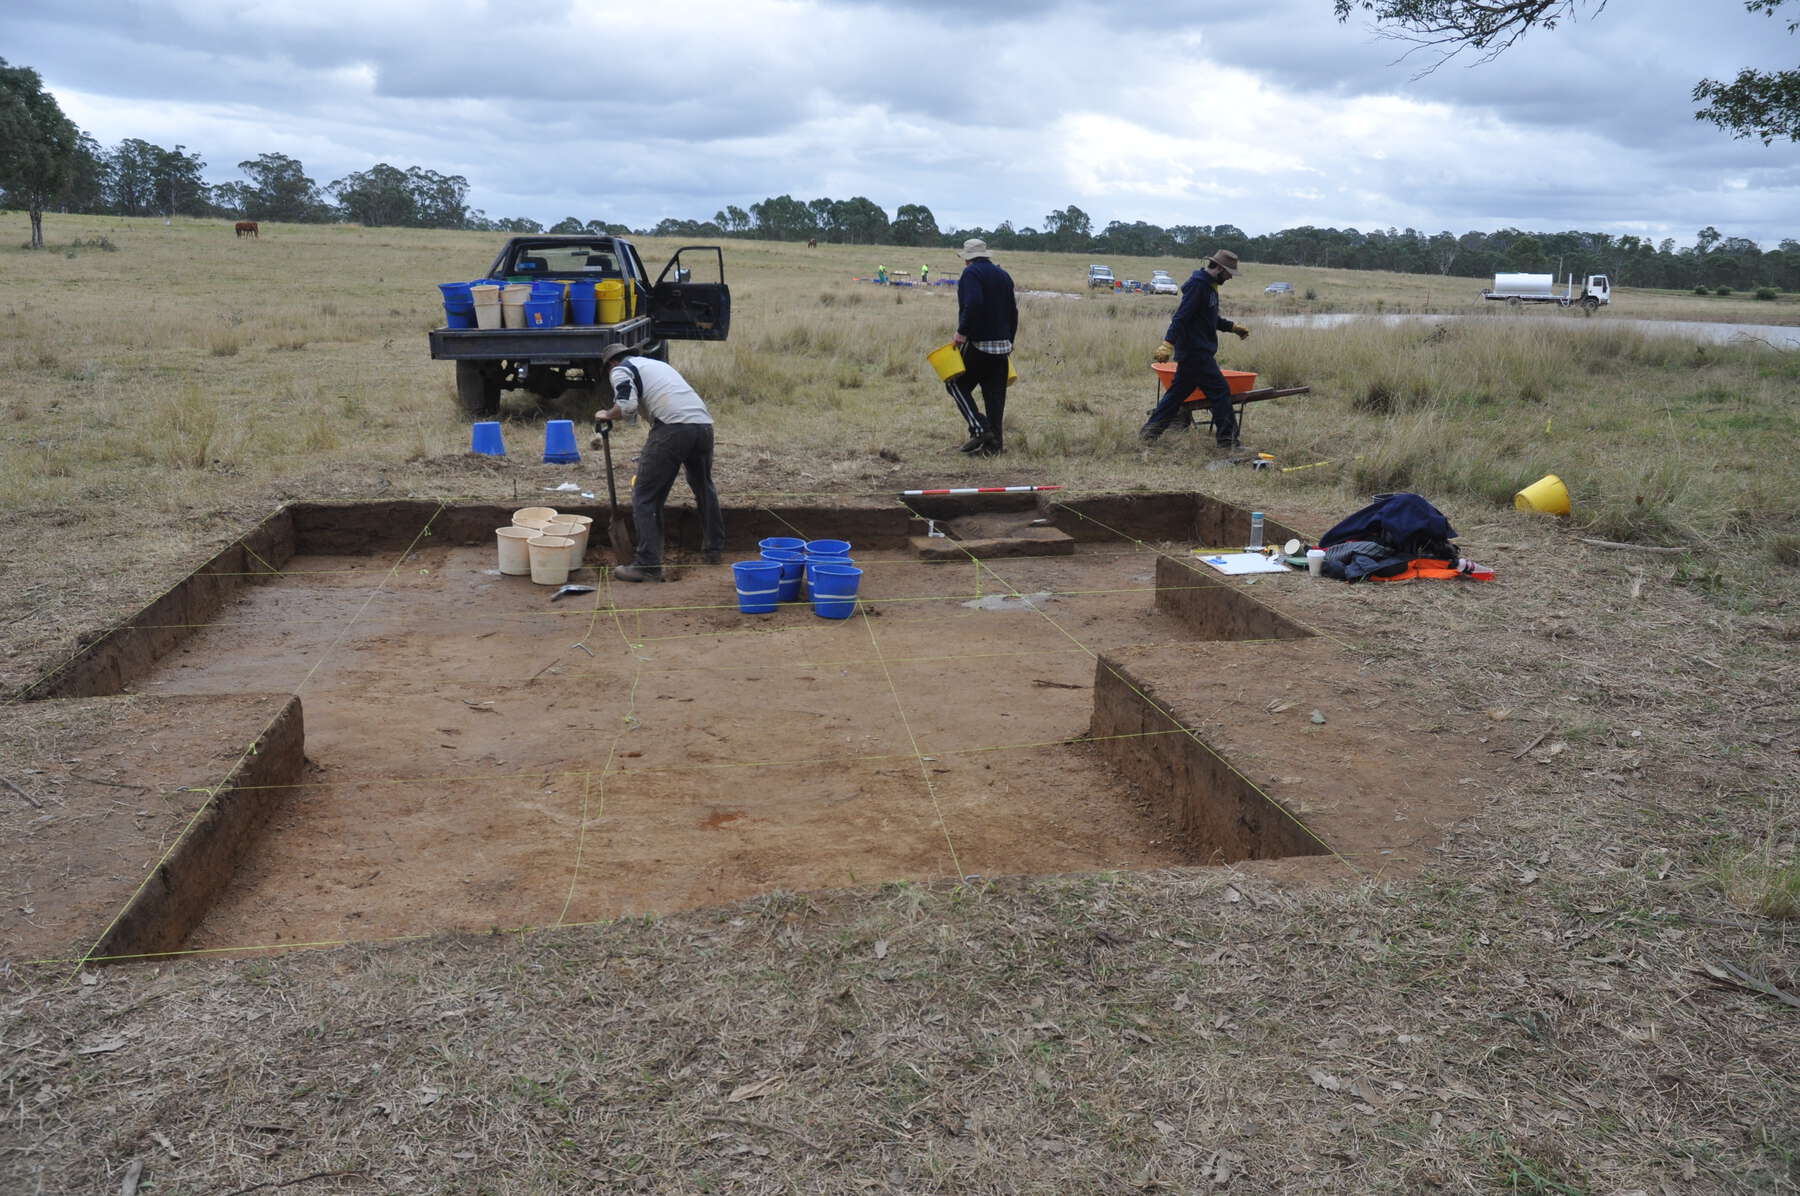 Three men work on an excavation in an open field. In the back, a truck is loaded with several buckets of their findings.